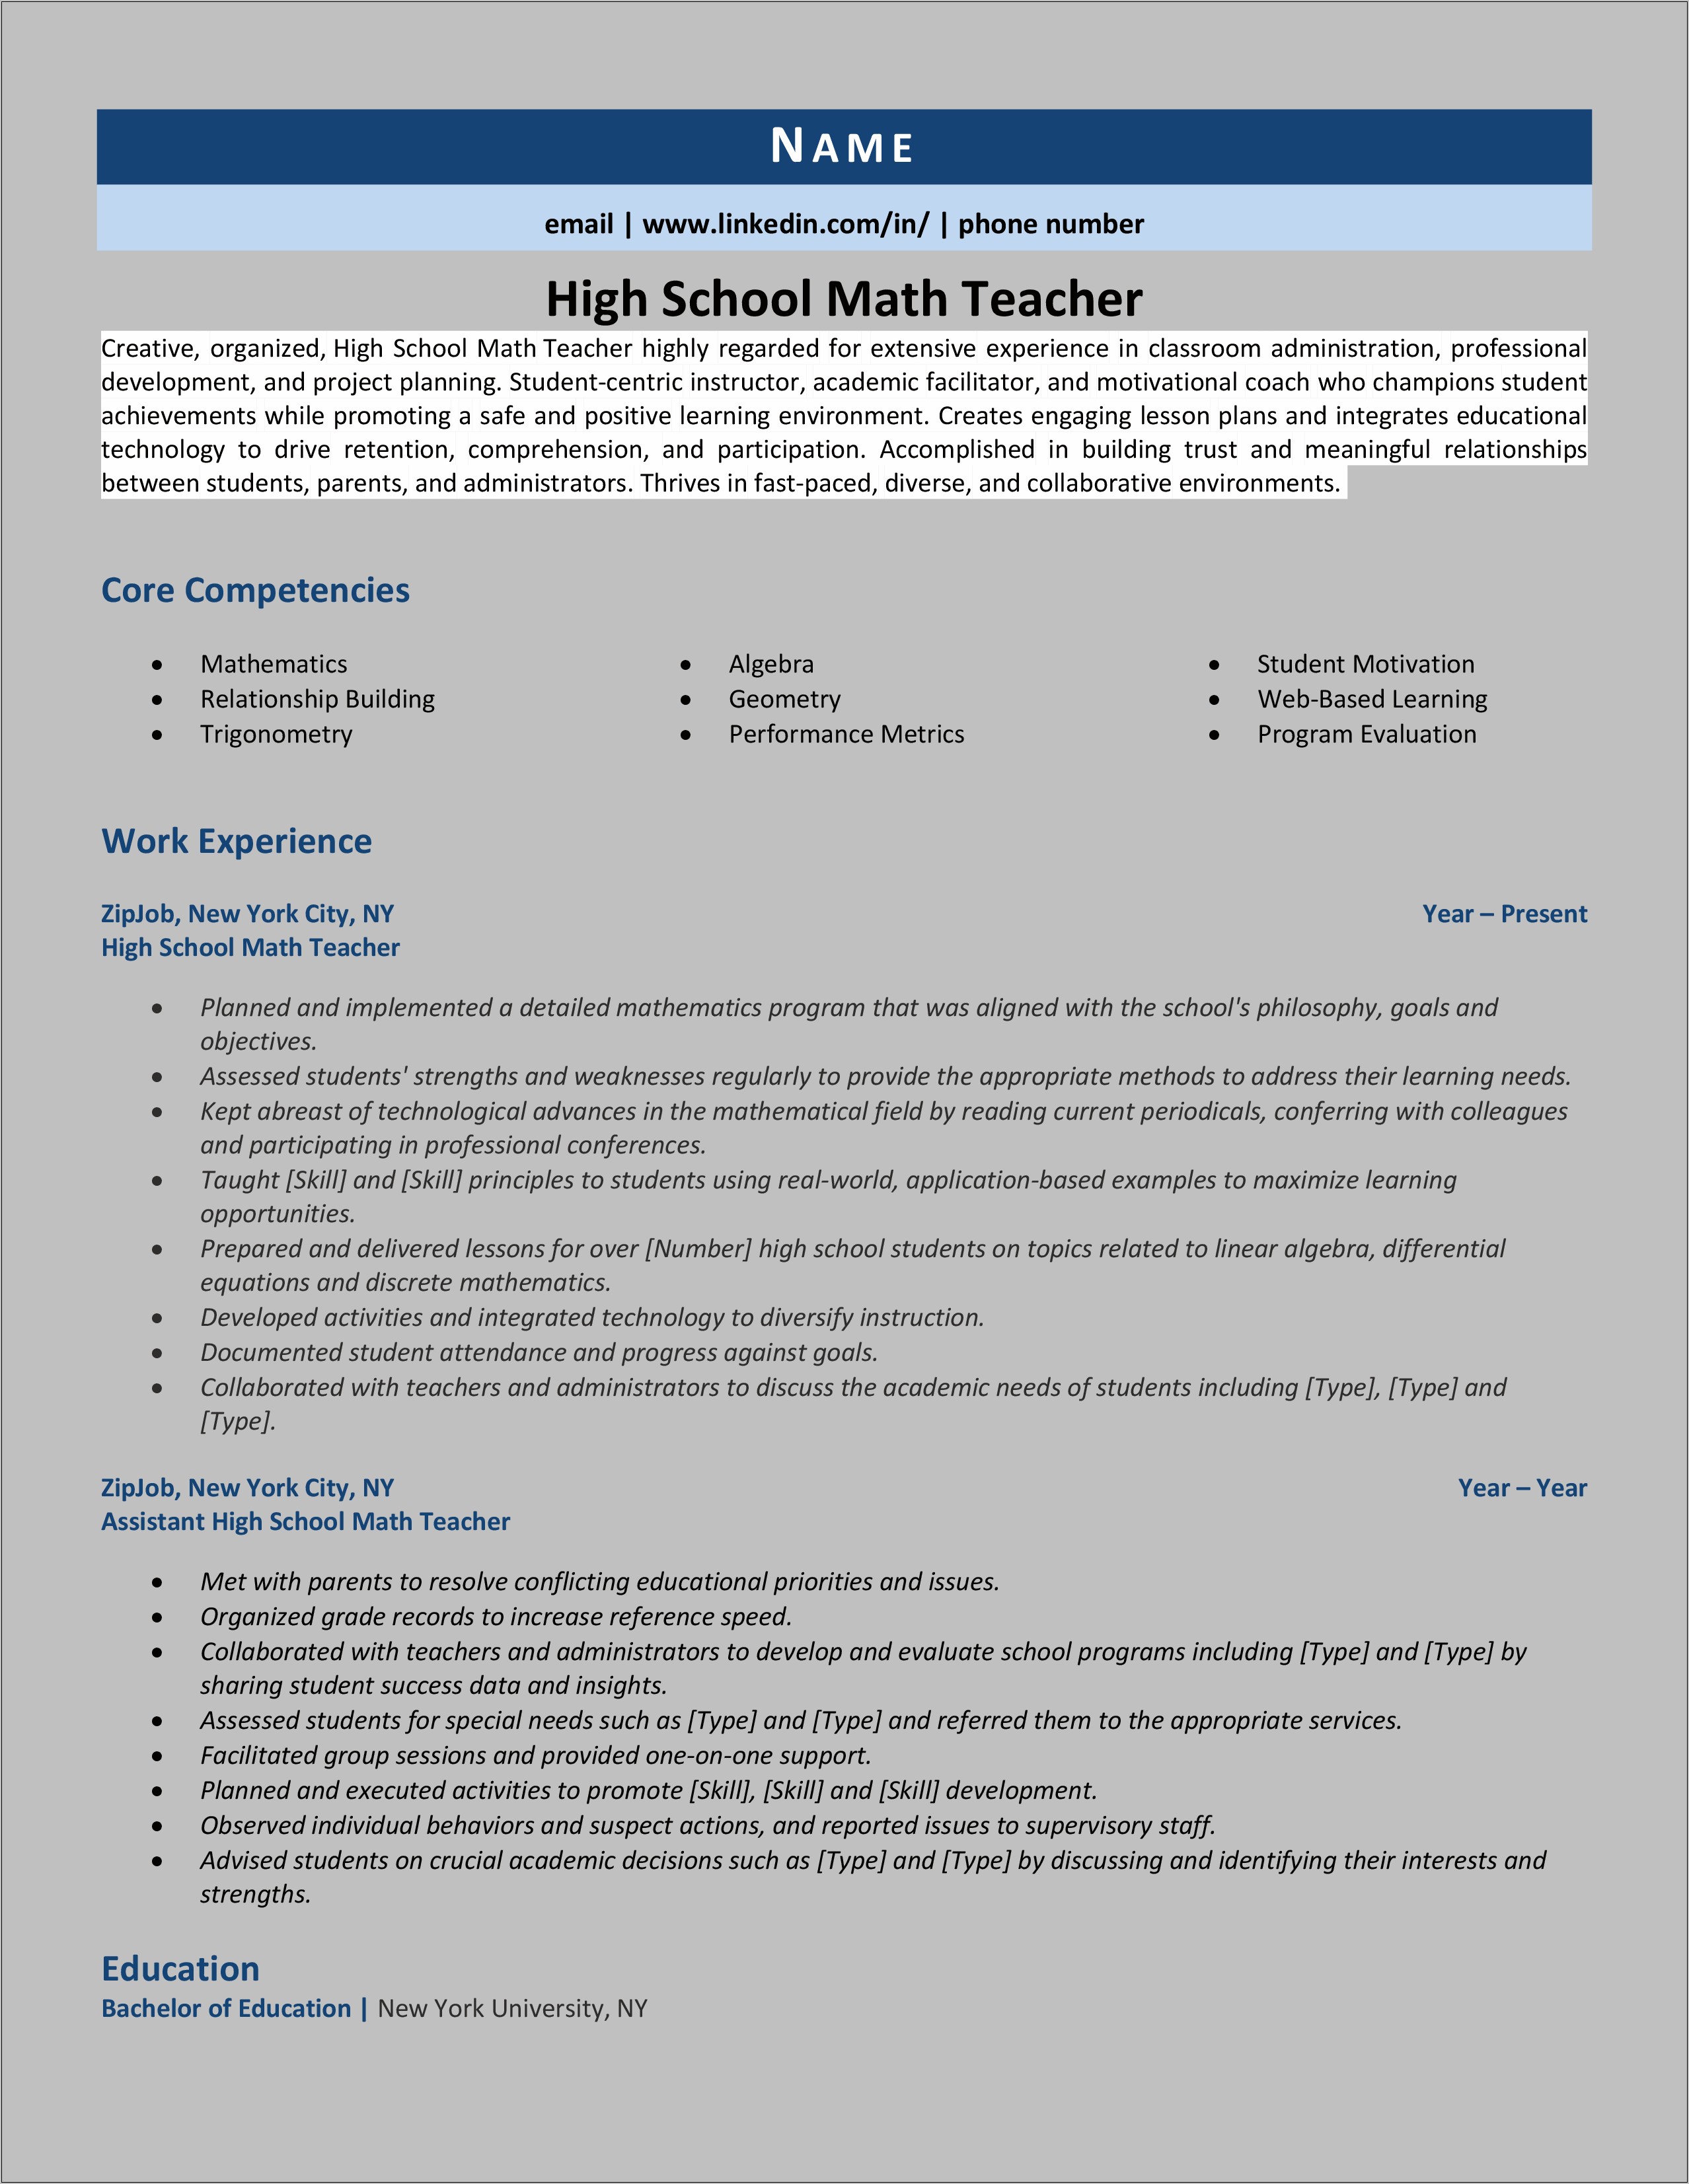 Resumes For High School Science Teachers